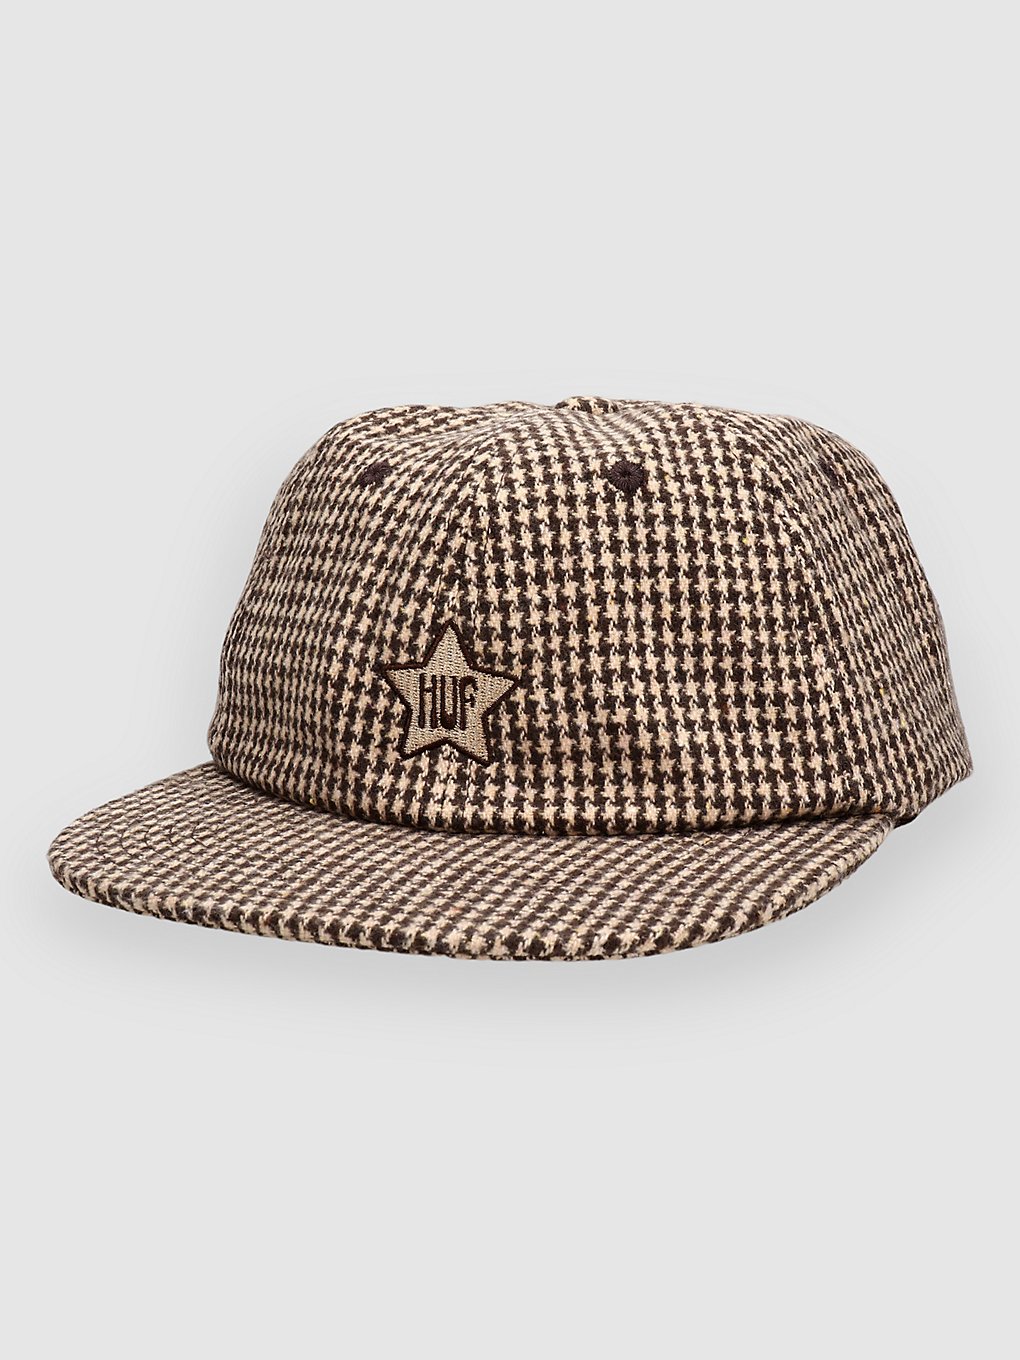 HUF One Star Houndstooth 6 Cap oatmeal kaufen